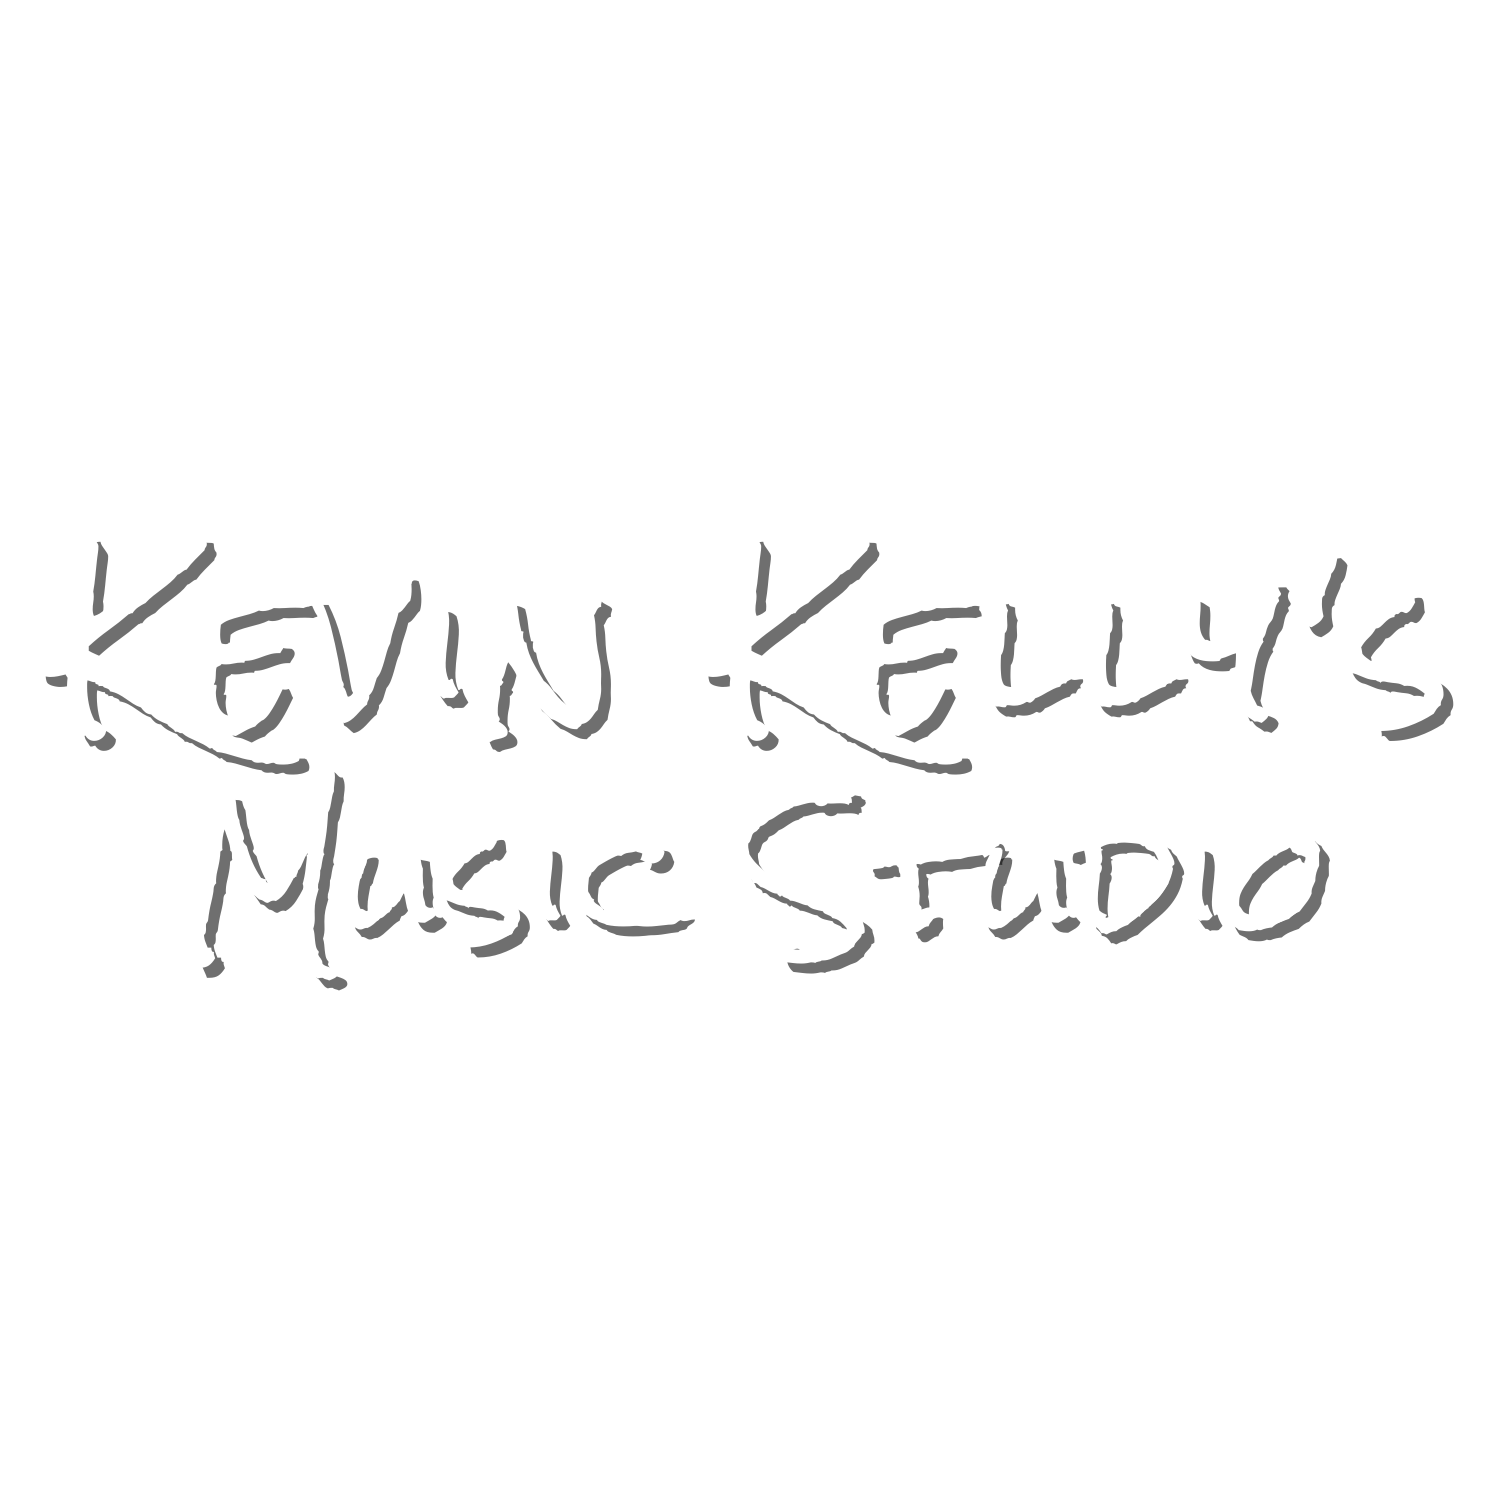 Kevin Kelly's Music Studio